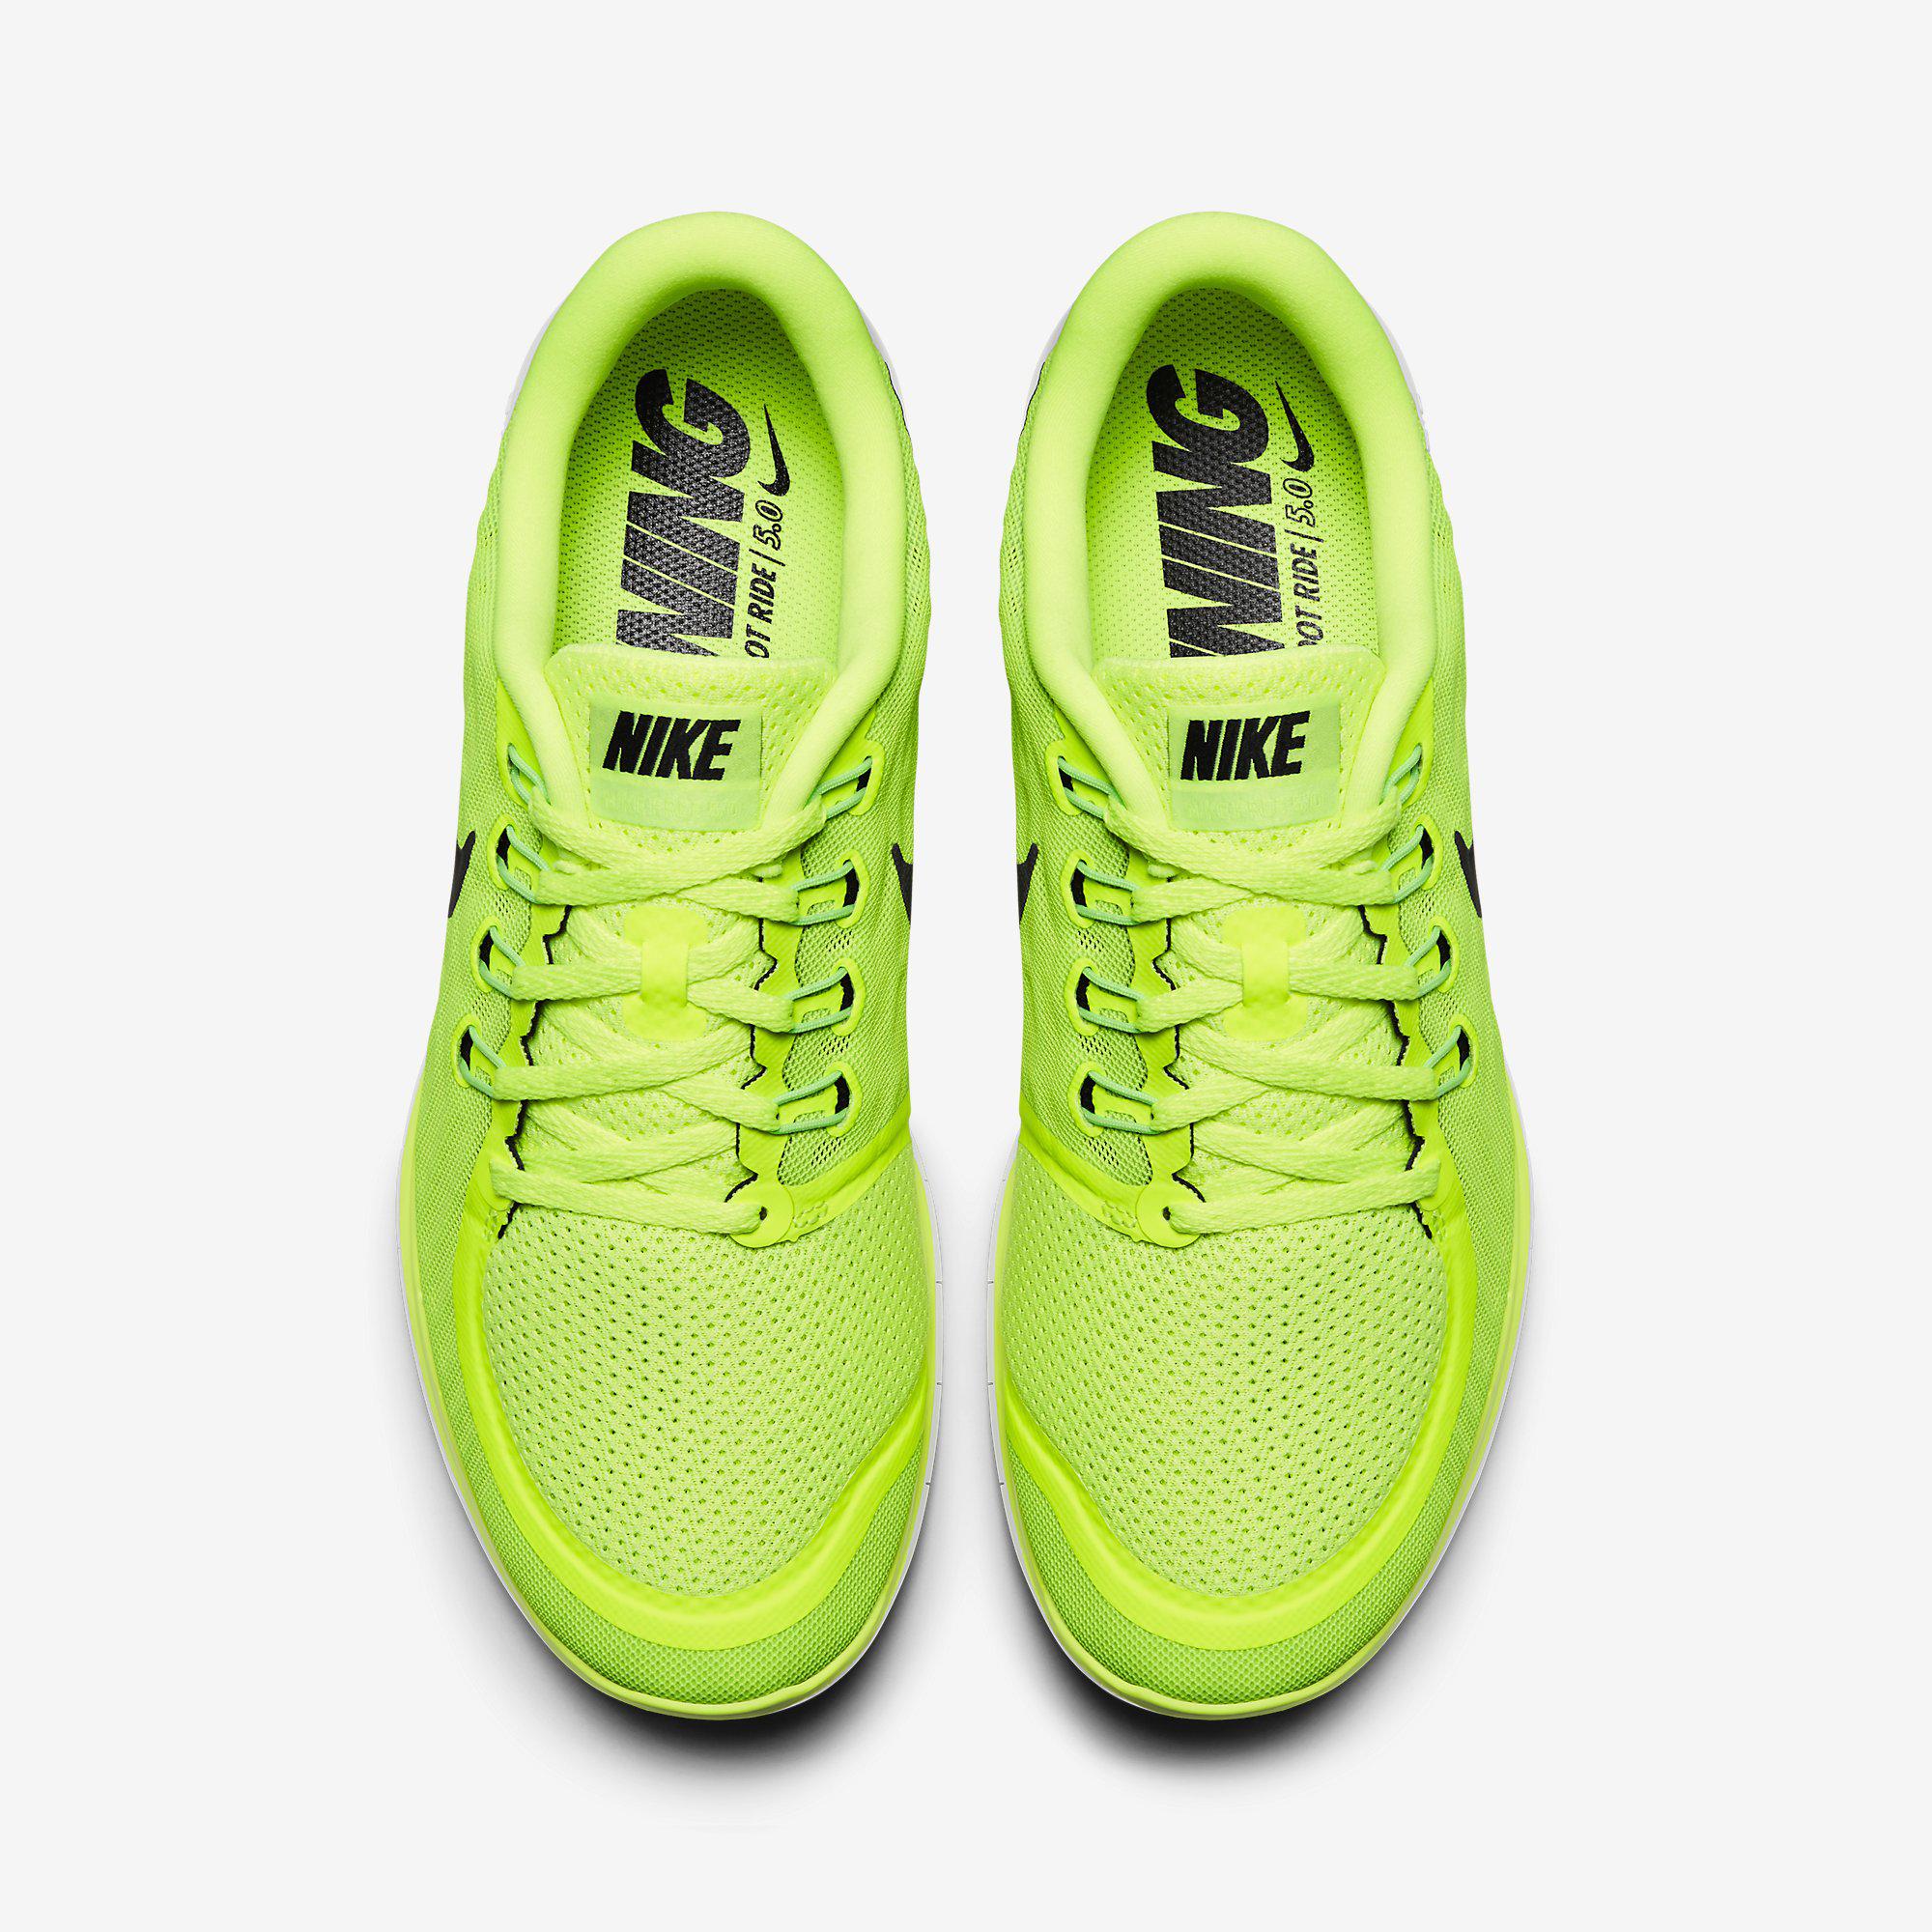 Nike Mens Free 5.0+ Running Shoes Volt/Electric Green